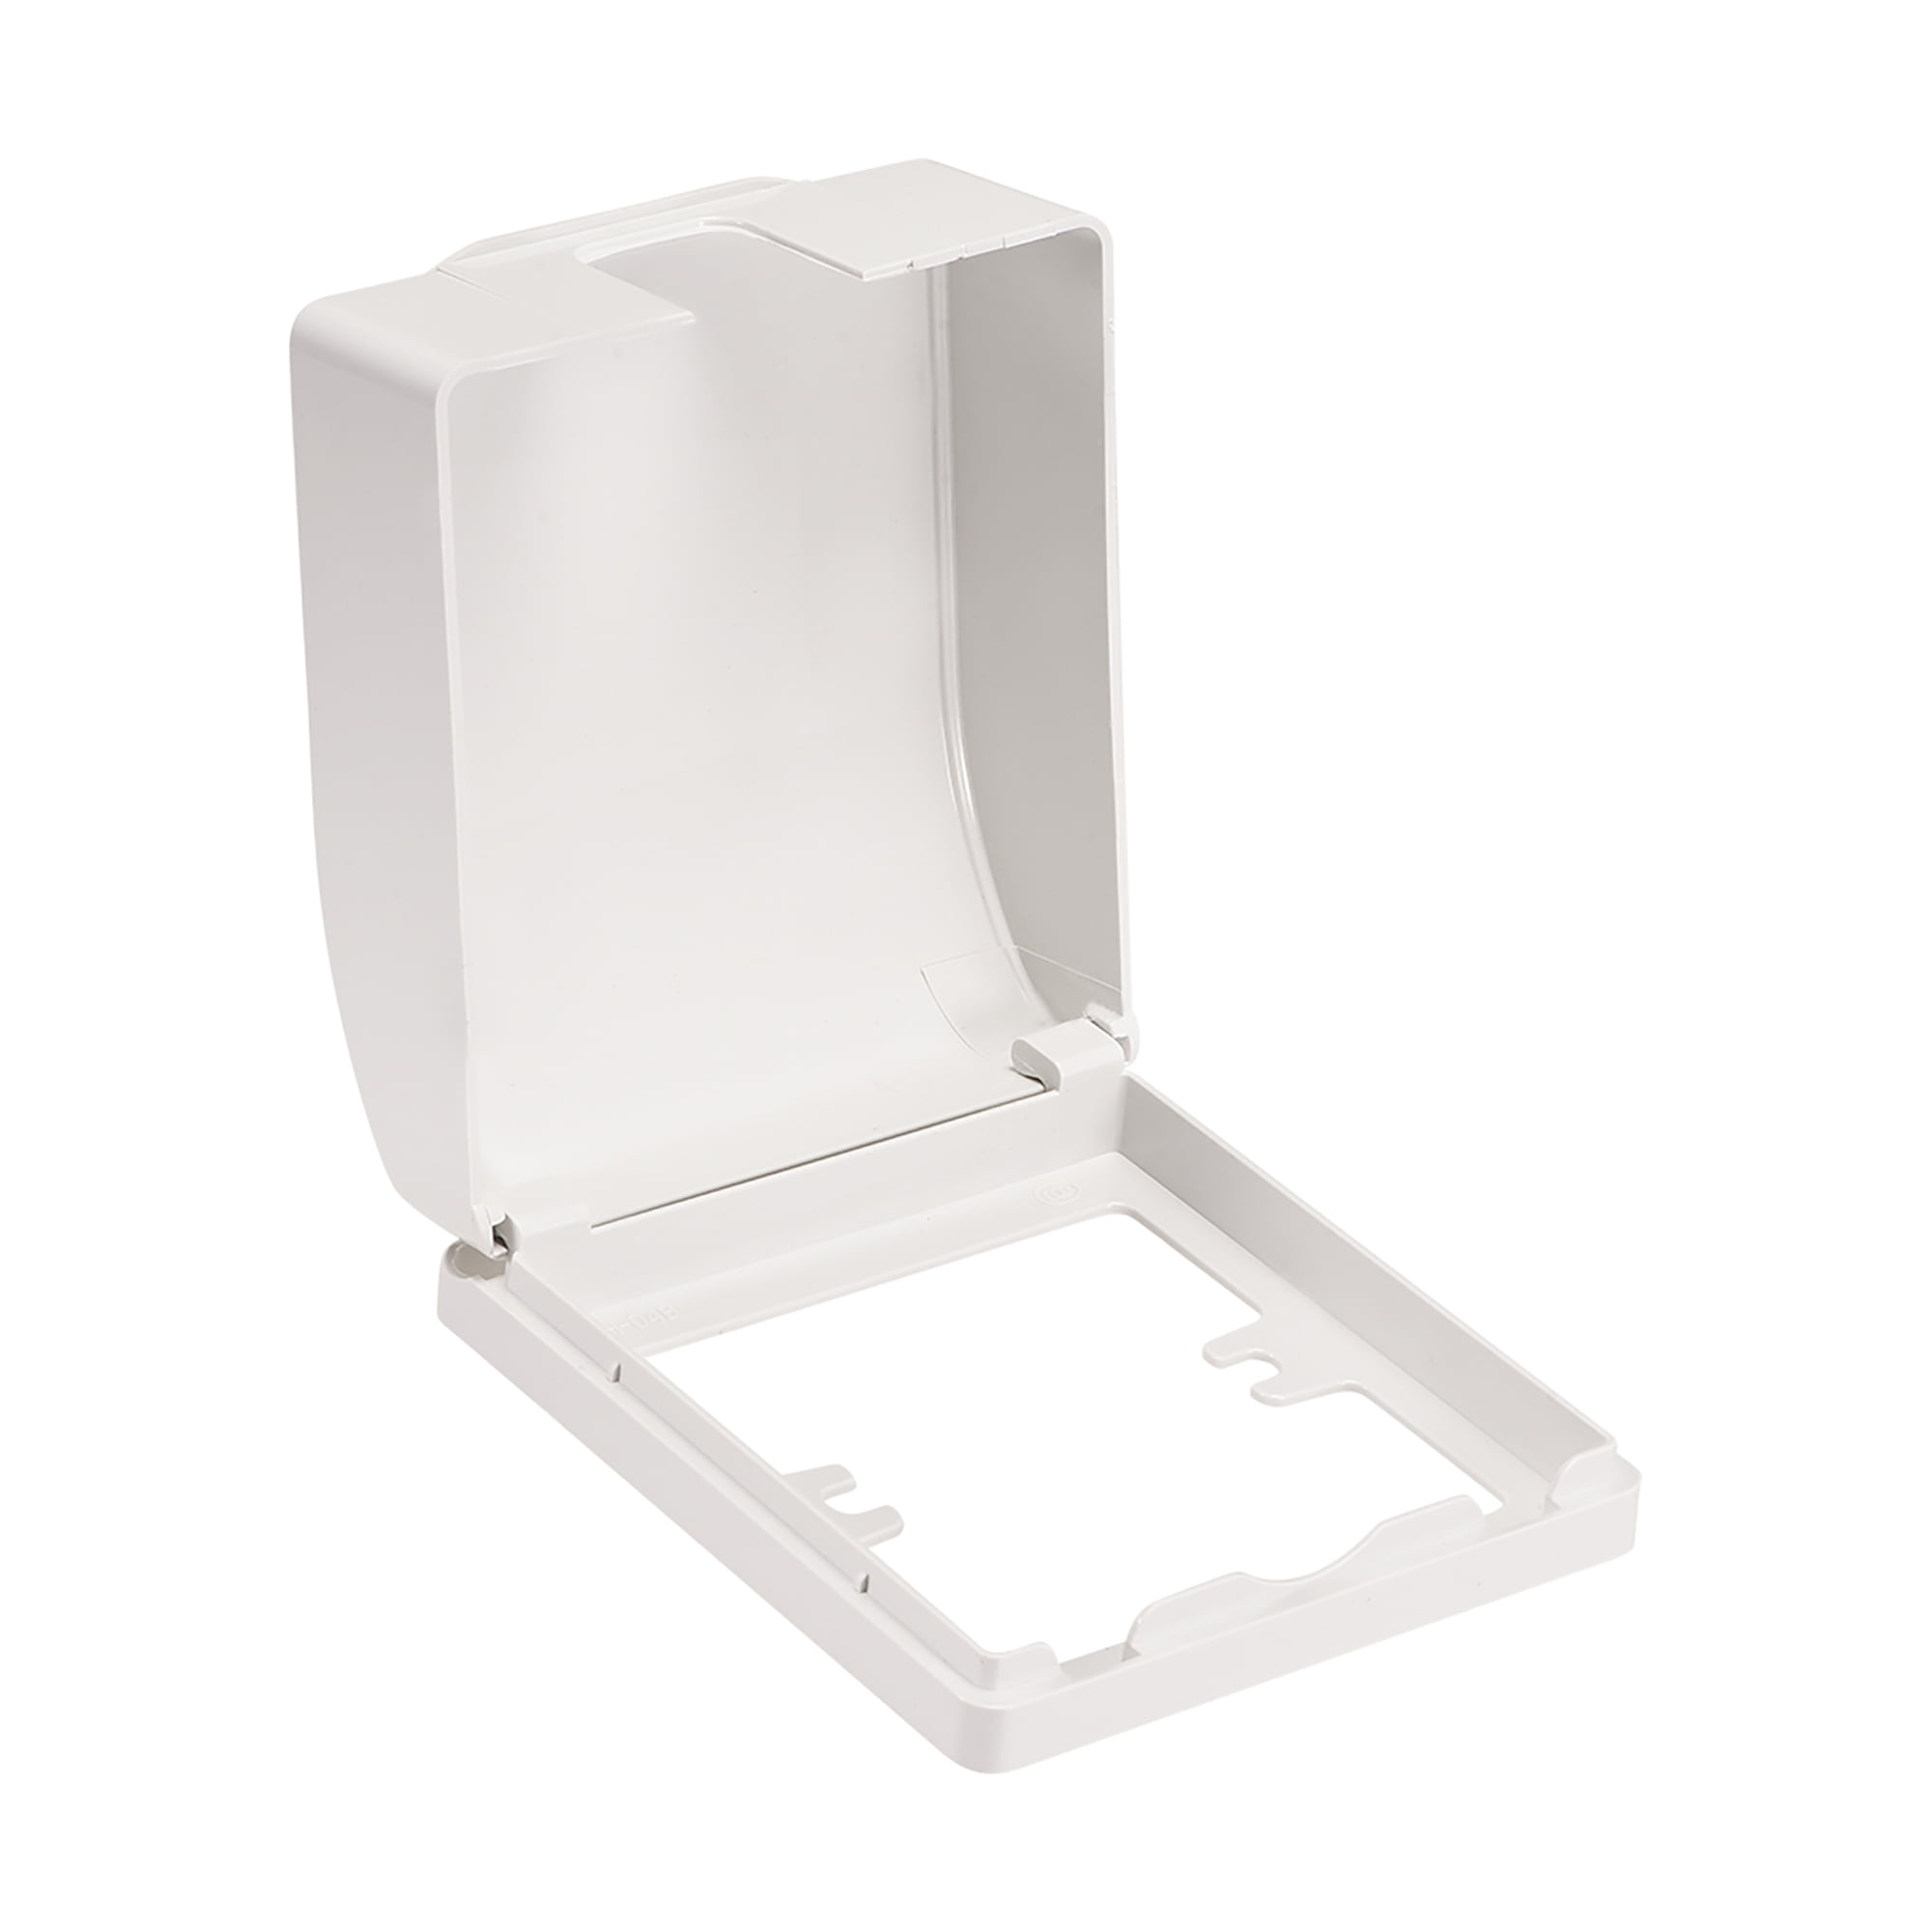 Weatherproof outlet cover Plug In use Receptacle Interior Protector Use 98x110x55mm White 